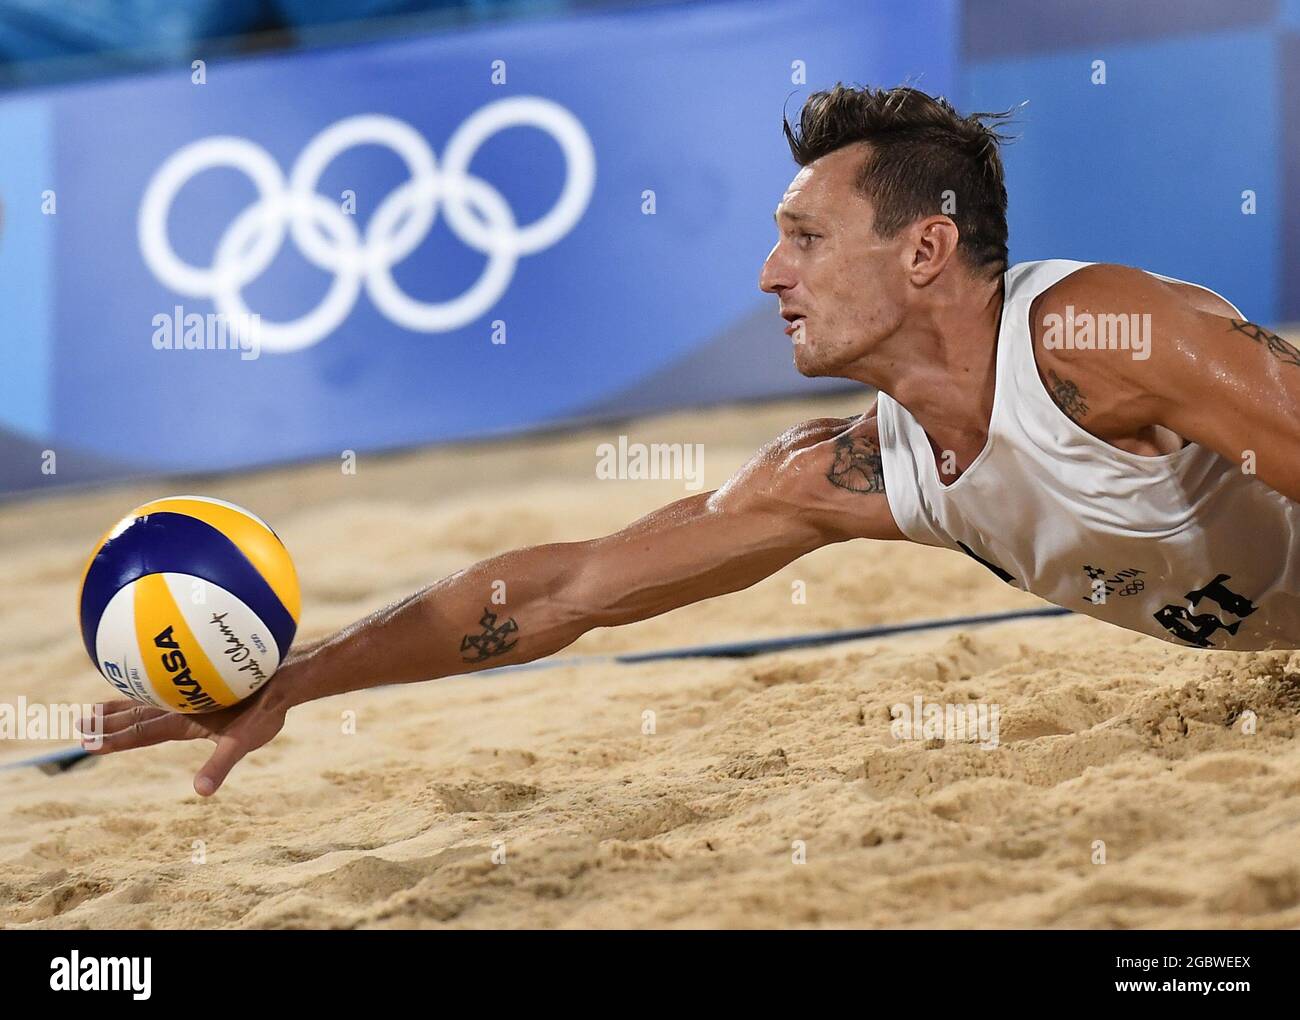 Tokyo, Japan. 5th Aug, 2021. Latvia's Martins Plavins competes during the men's beach volleyball semifinal between Anders Berntsen Mol/Christian Sandlie Sorum of Norway and Martins Plavins/Edgars Tocs of Latvia at the Tokyo 2020 Olympic Games in Tokyo, Japan, Aug. 5, 2021. Credit: Li He/Xinhua/Alamy Live News Stock Photo